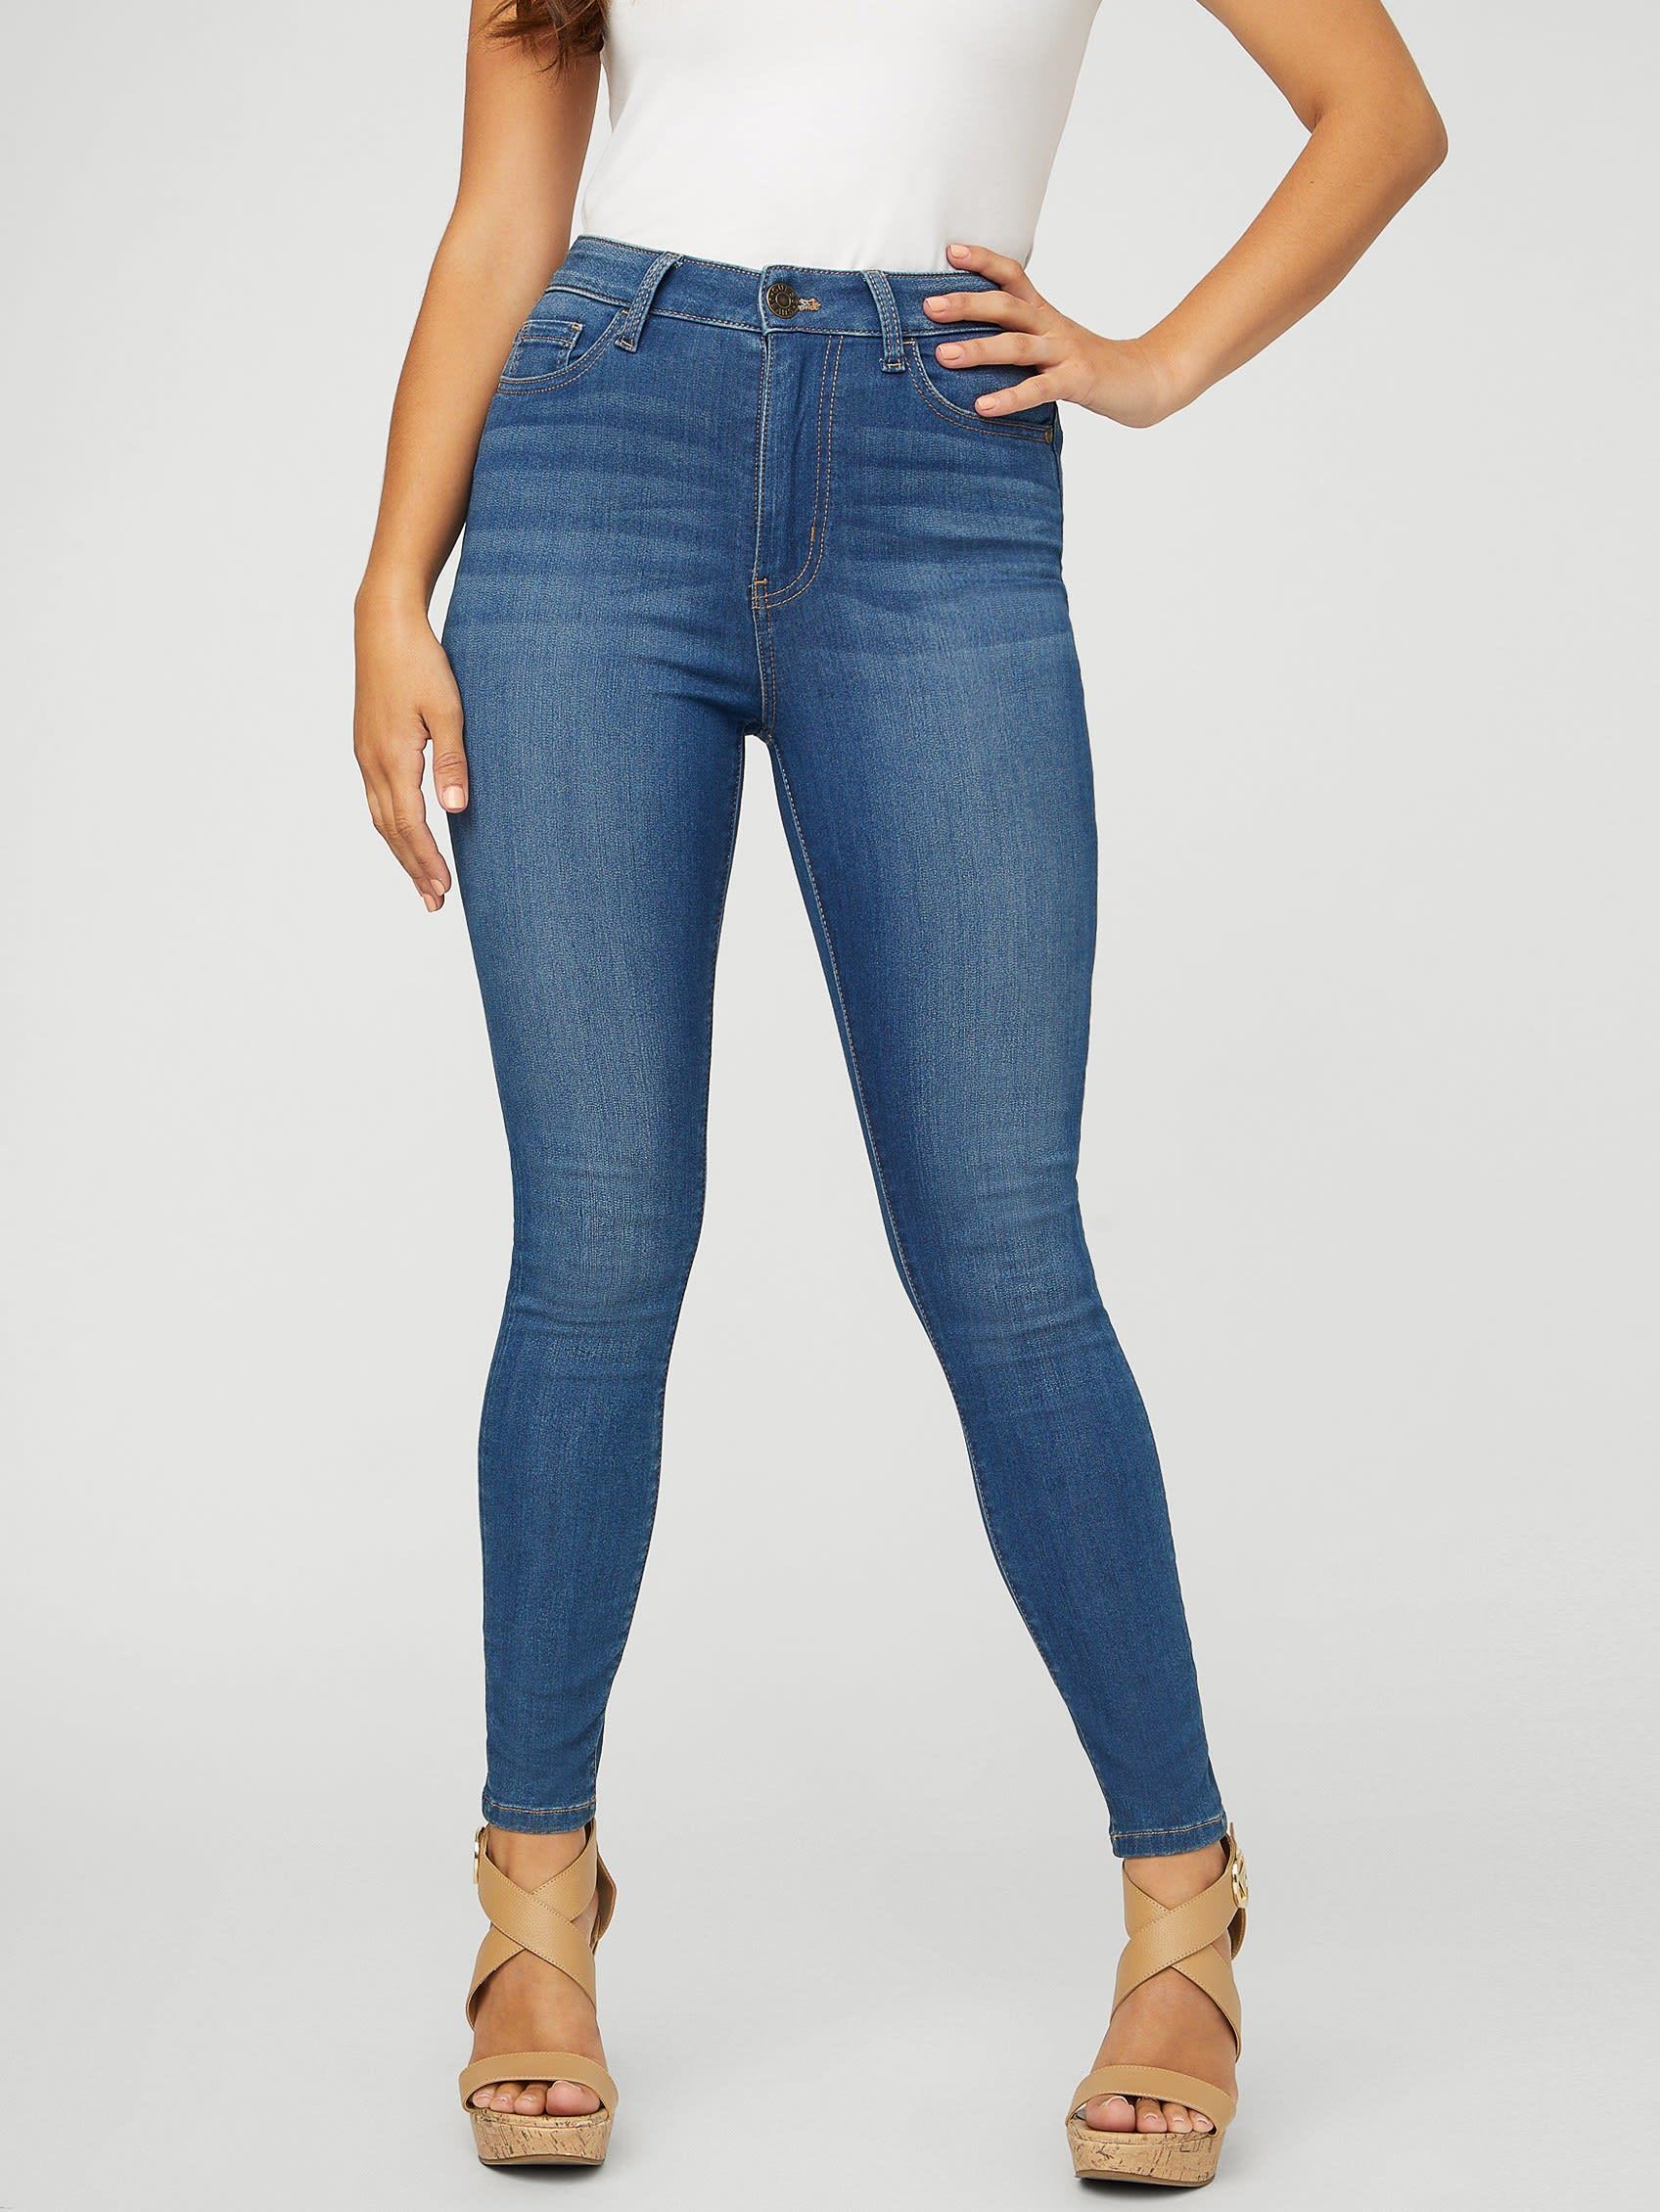 Guess Factory Denim Eco Simmone High-rise Skinny Jeans in Blue | Lyst